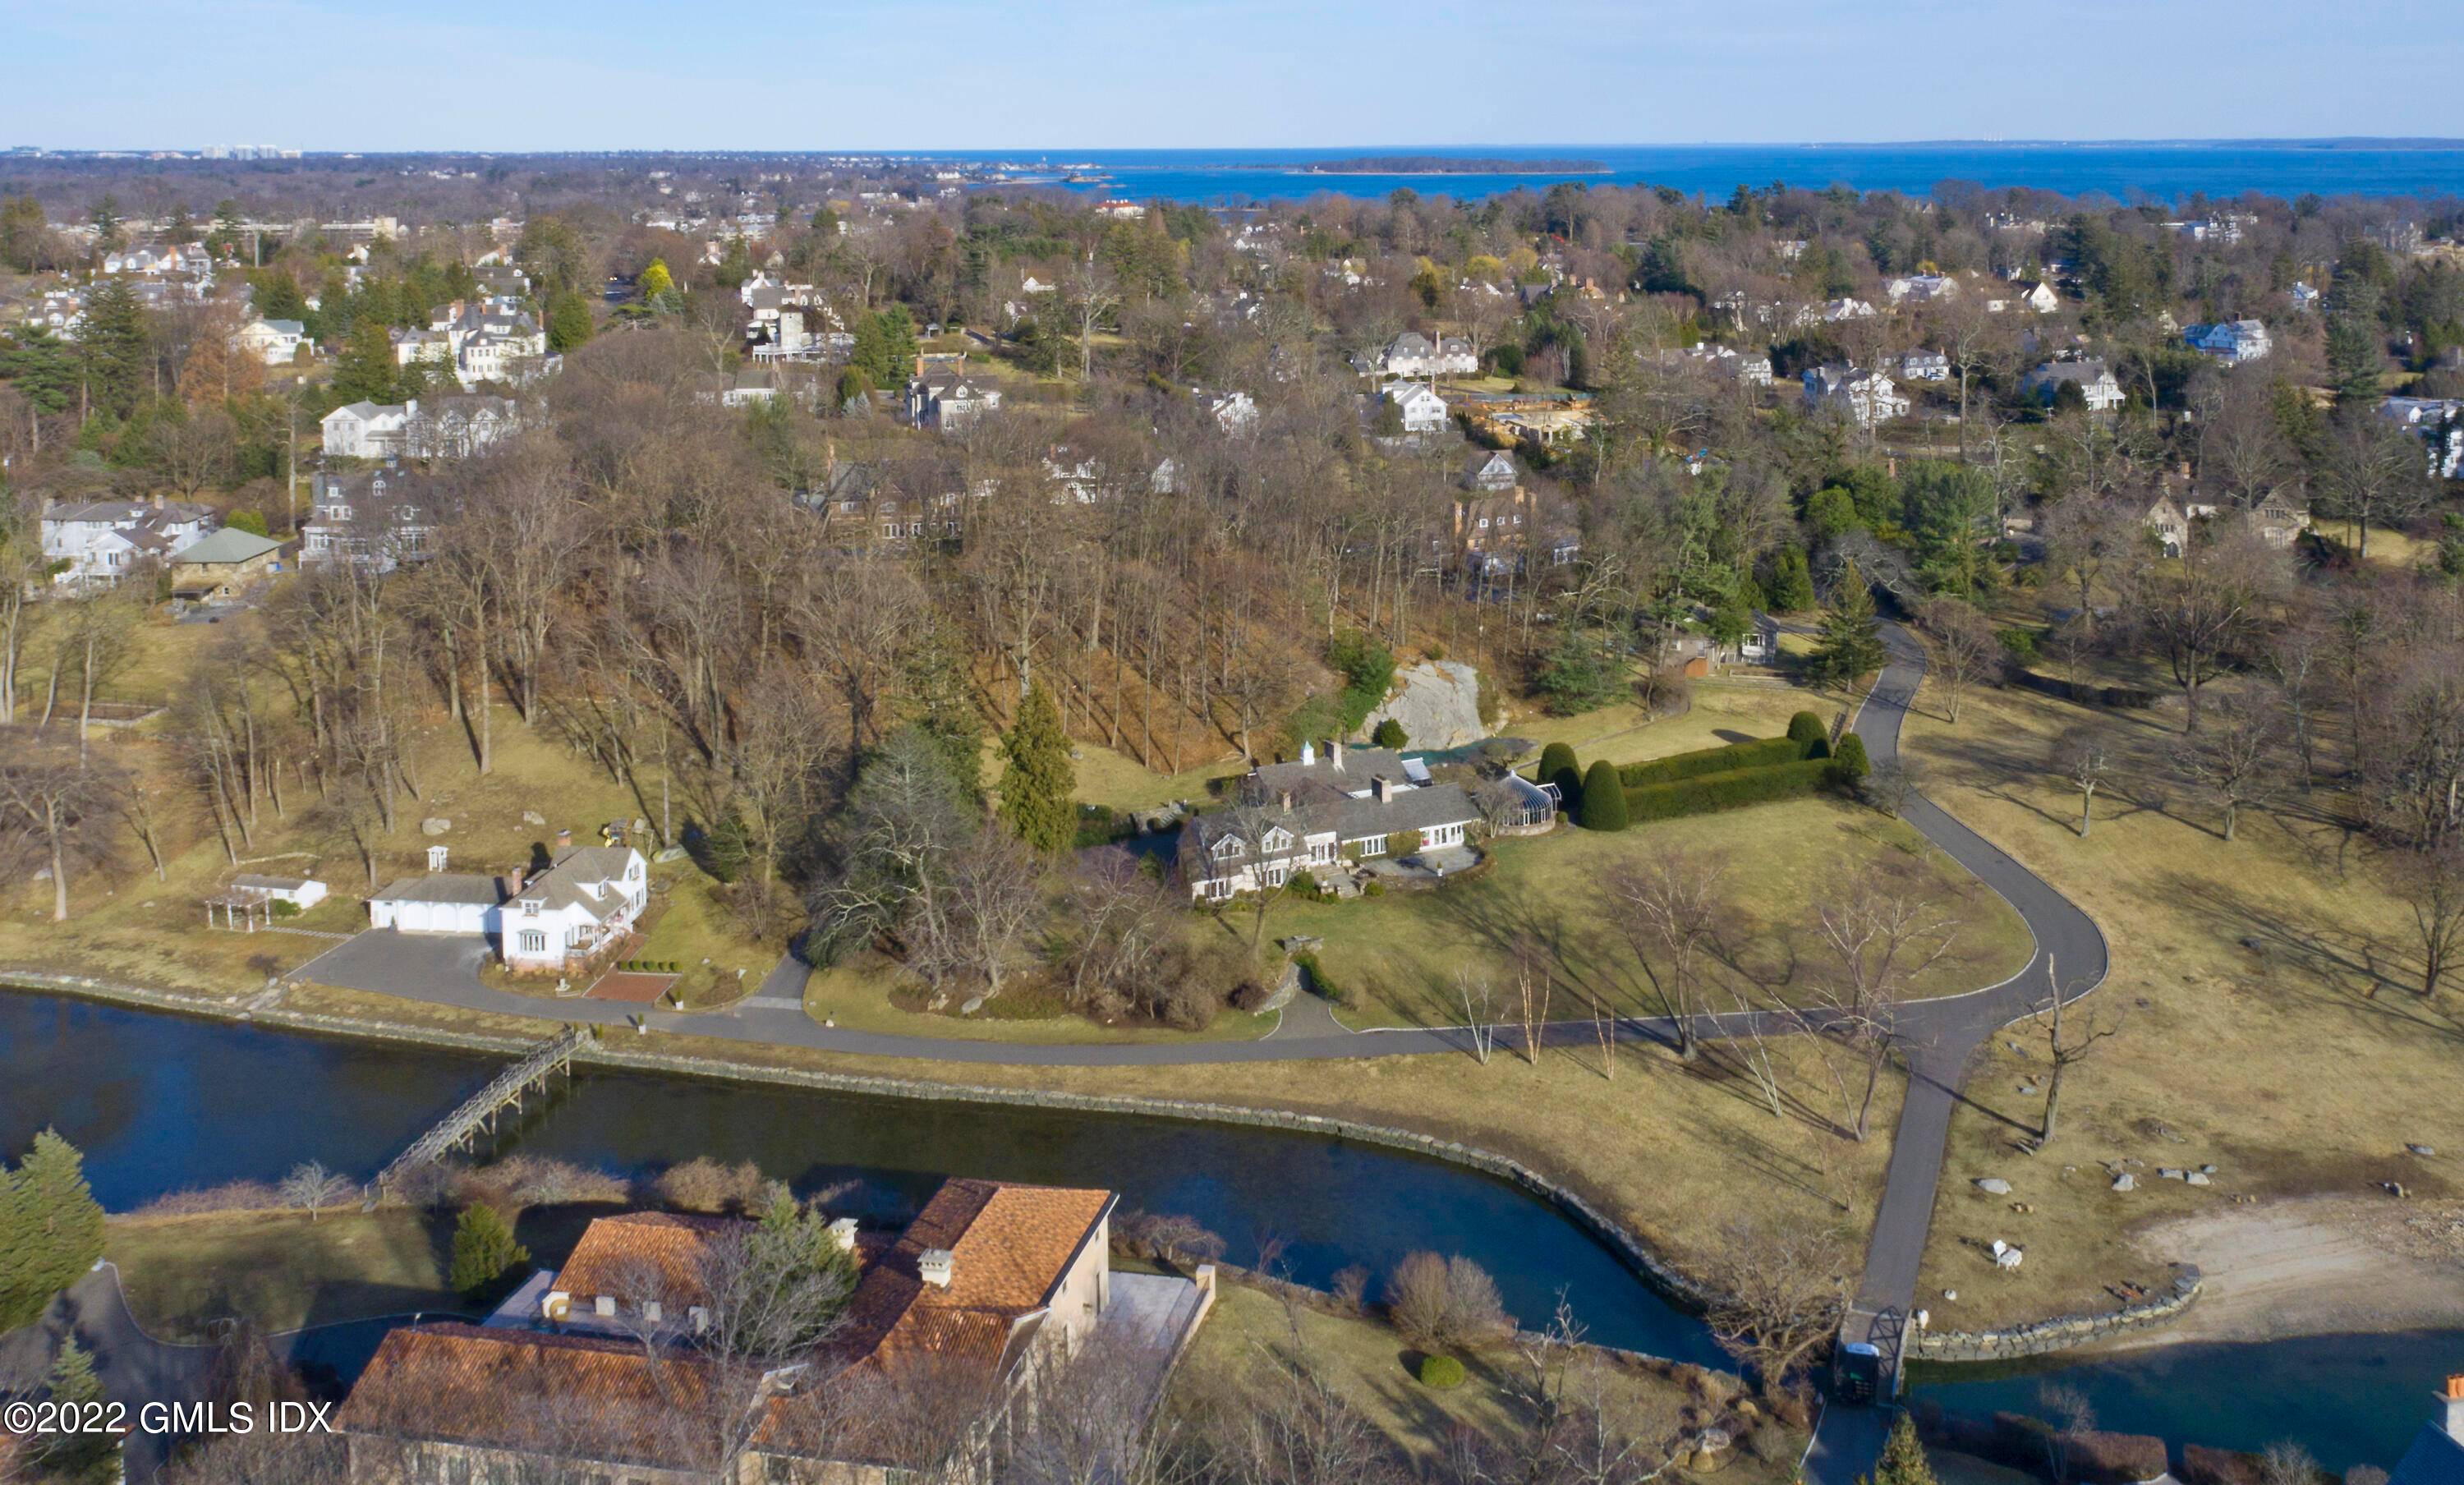 Located in one of most coveted areas of Greenwich, within the gates of Belle Haven the gated community of Quarry Farm Listed at a compelling value for 6.